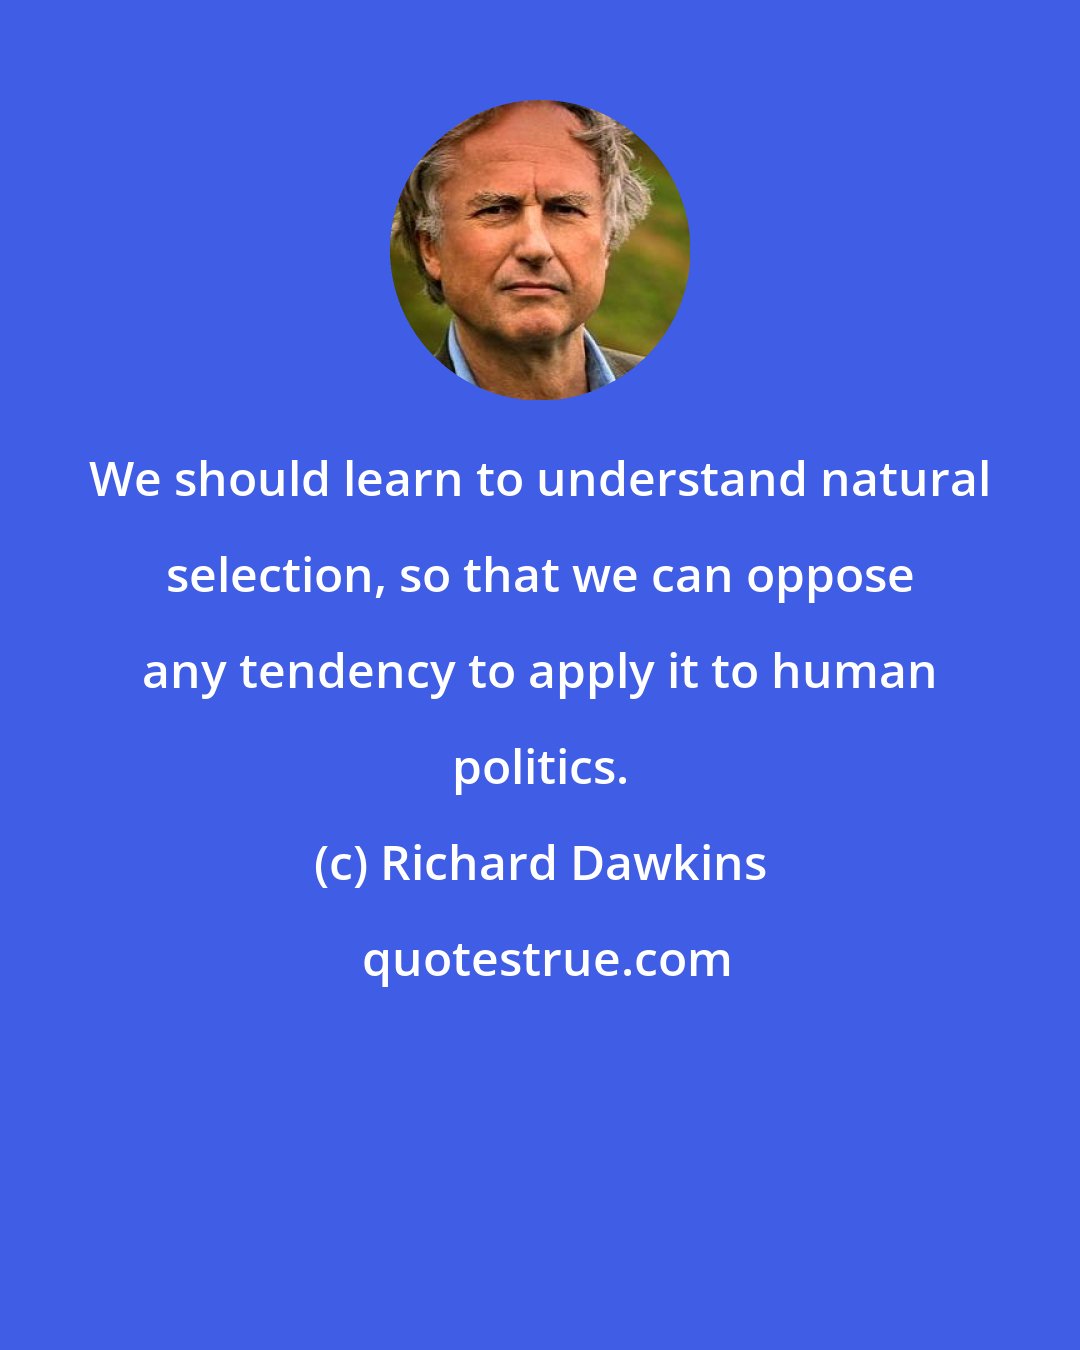 Richard Dawkins: We should learn to understand natural selection, so that we can oppose any tendency to apply it to human politics.